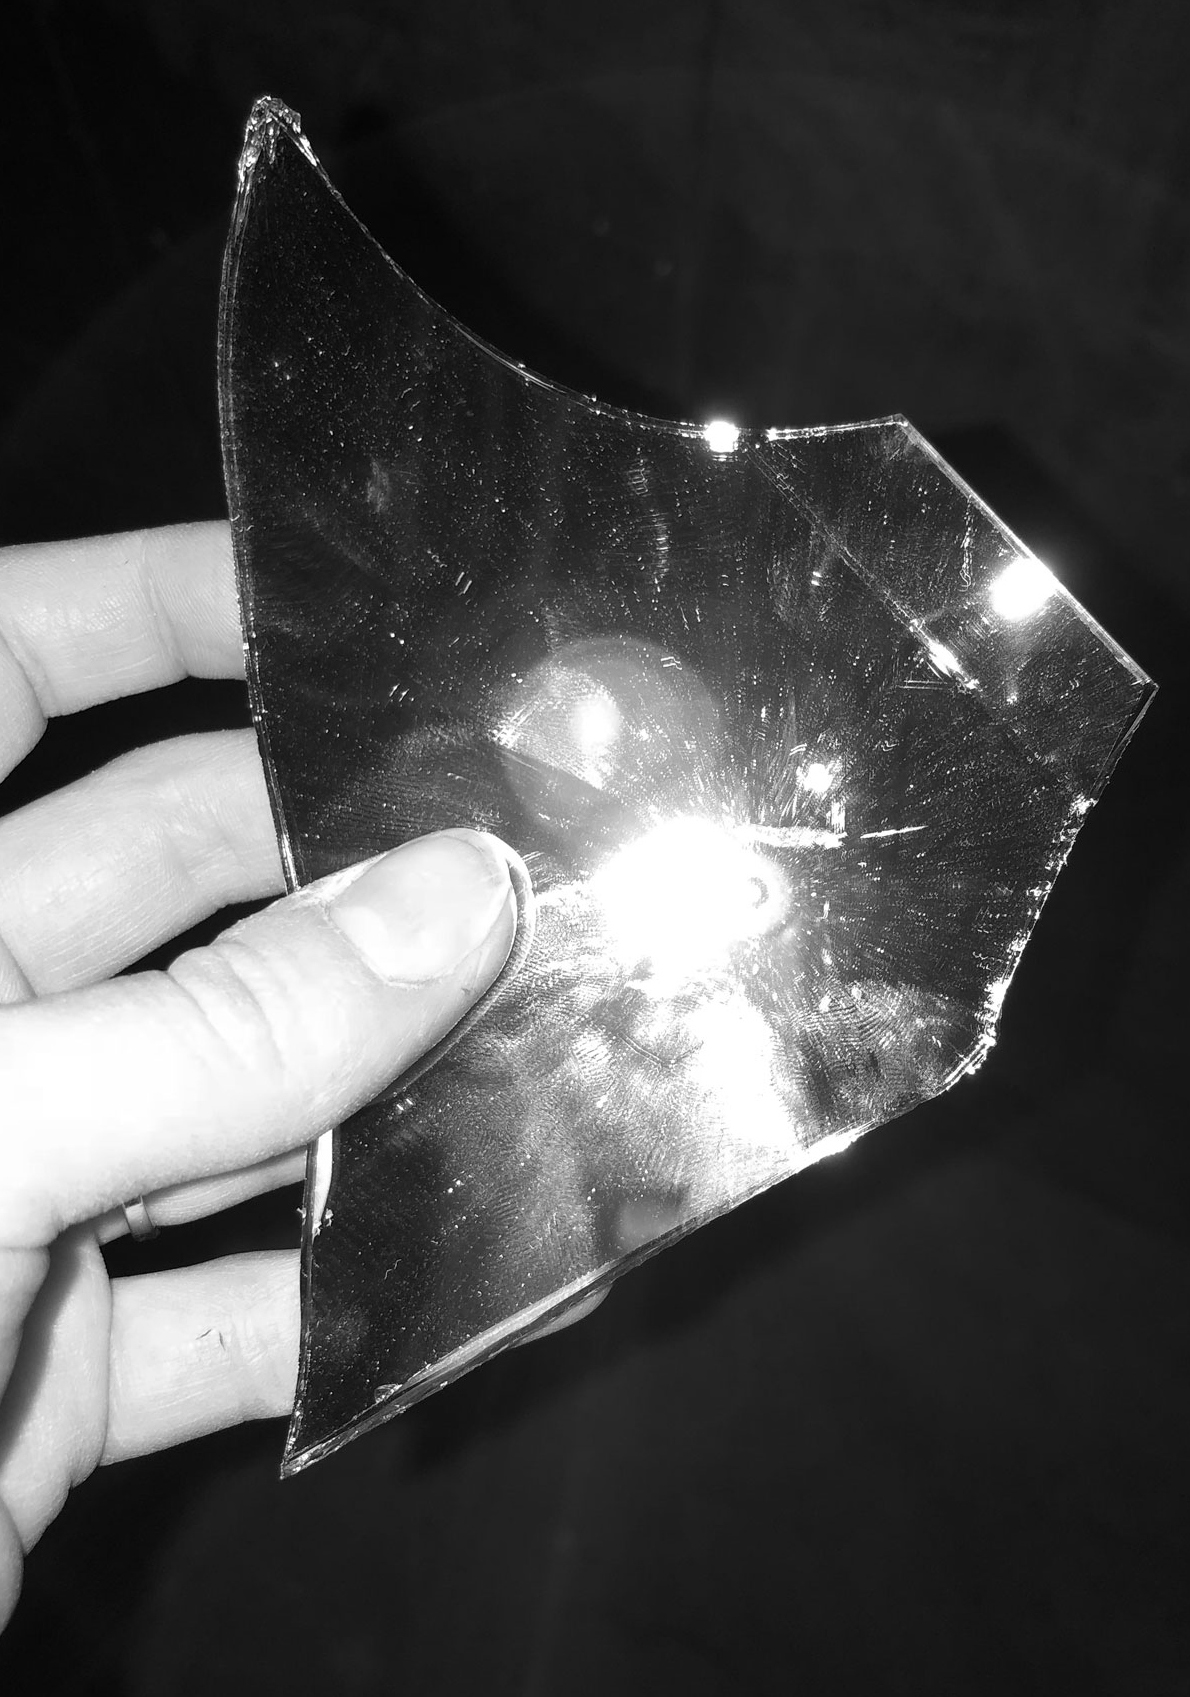 black and white photo of a shard of glass